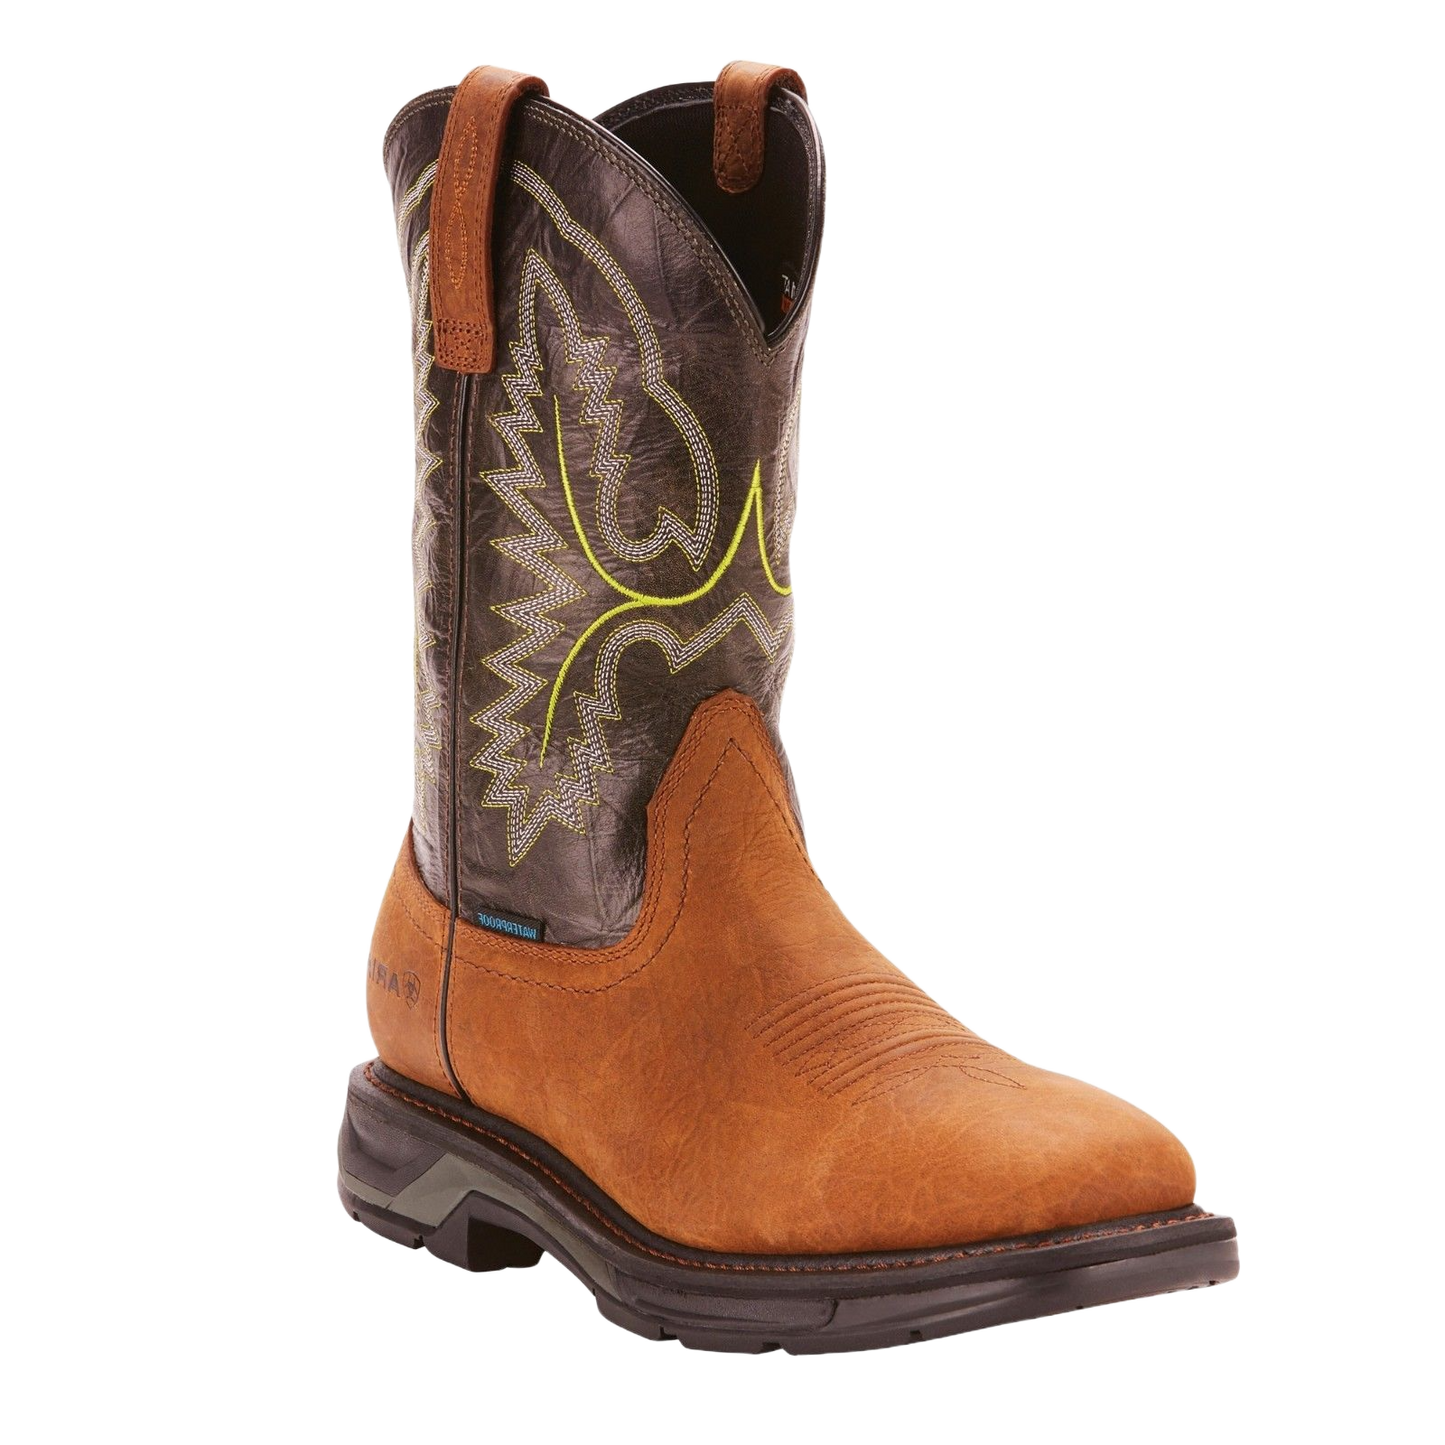 Ariat® Men's Workhog XT Bark/Forest H2O Square Toe Boots 10024971